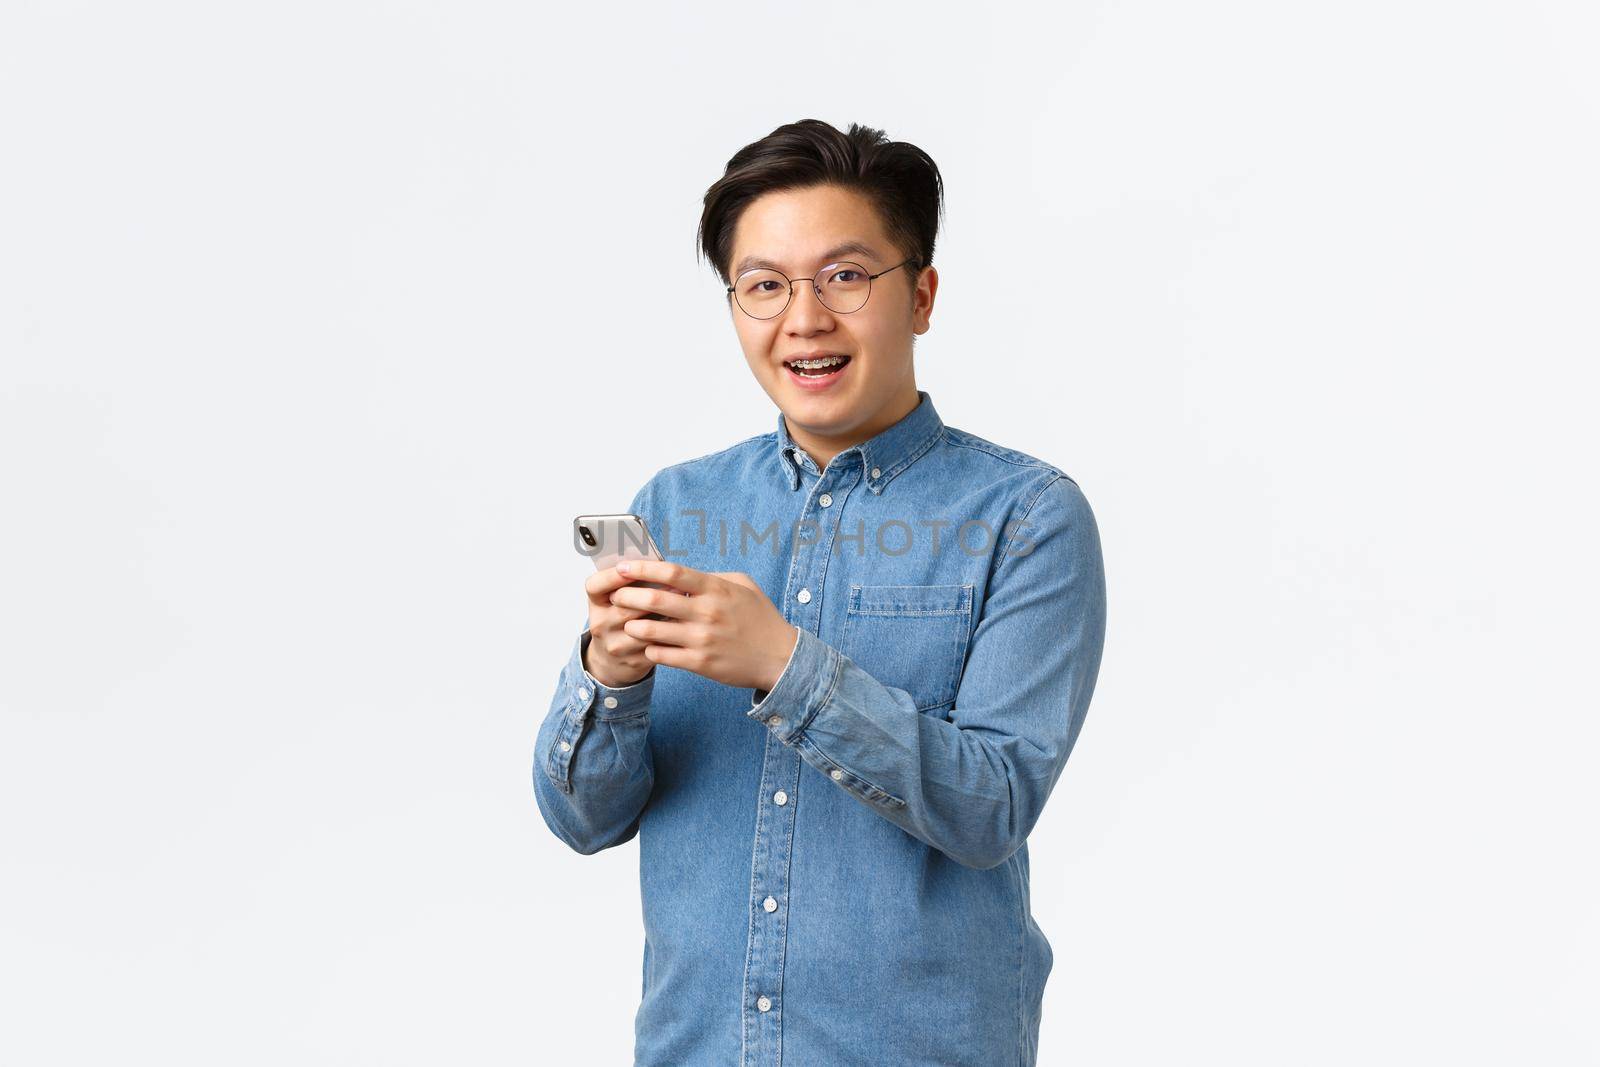 Smiling entertained asian man with braces, wearing glasses, messaging or watching video in internet, using mobile phone application, looking at camera pleased, standing white background.